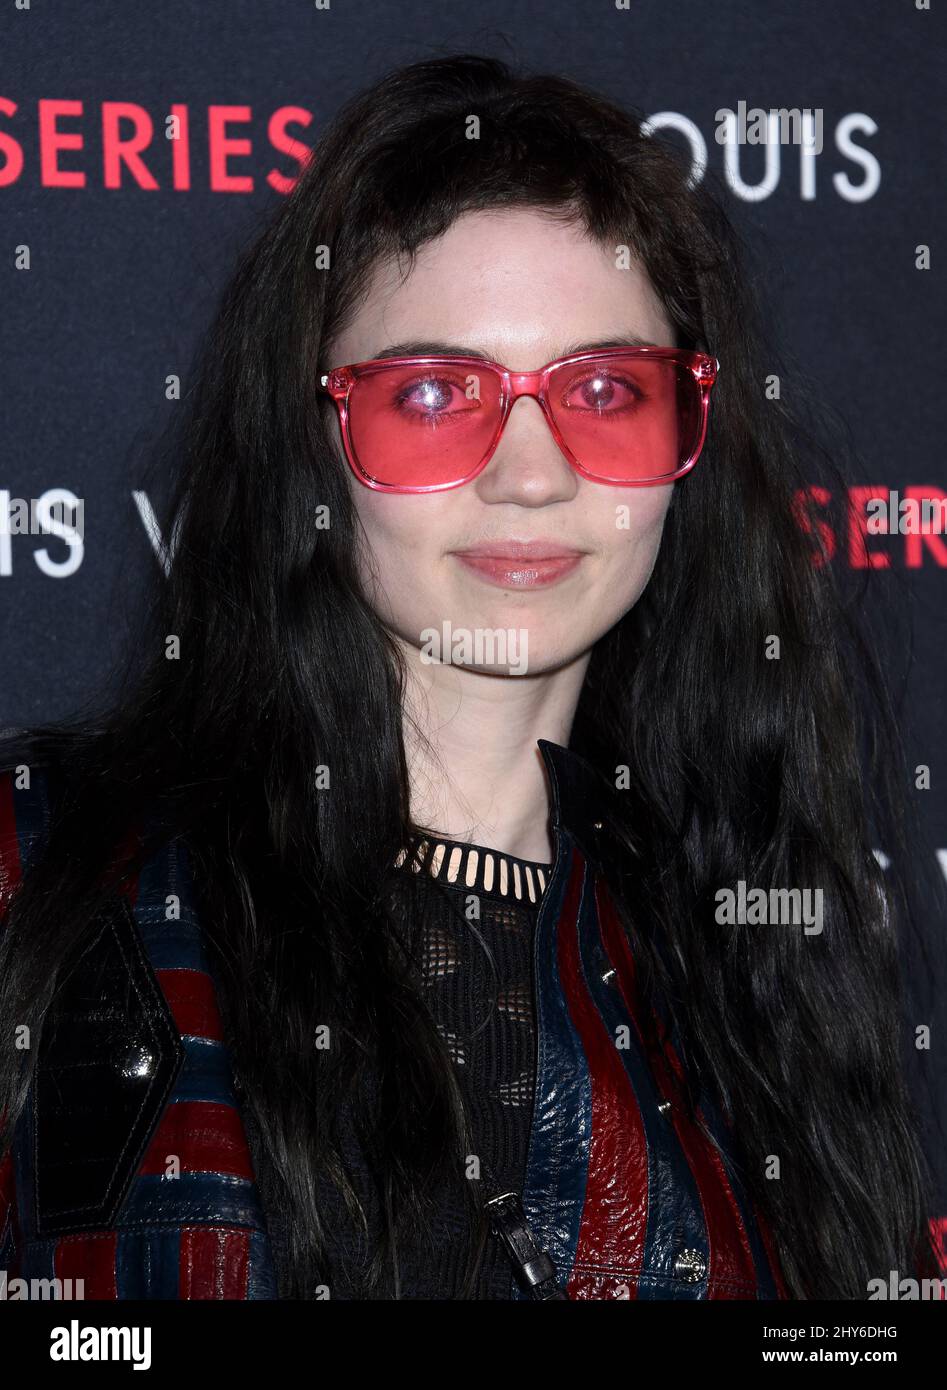 Grimes attends an event called, Louis Vuitton unveils an unconventional exhibition, 'SERIES 2 ??? Past, Present and Future'. This exhibition is a modern and unexpected interpretation of a fashion show. February 5, 2015 Los Angeles, Ca. Stock Photo